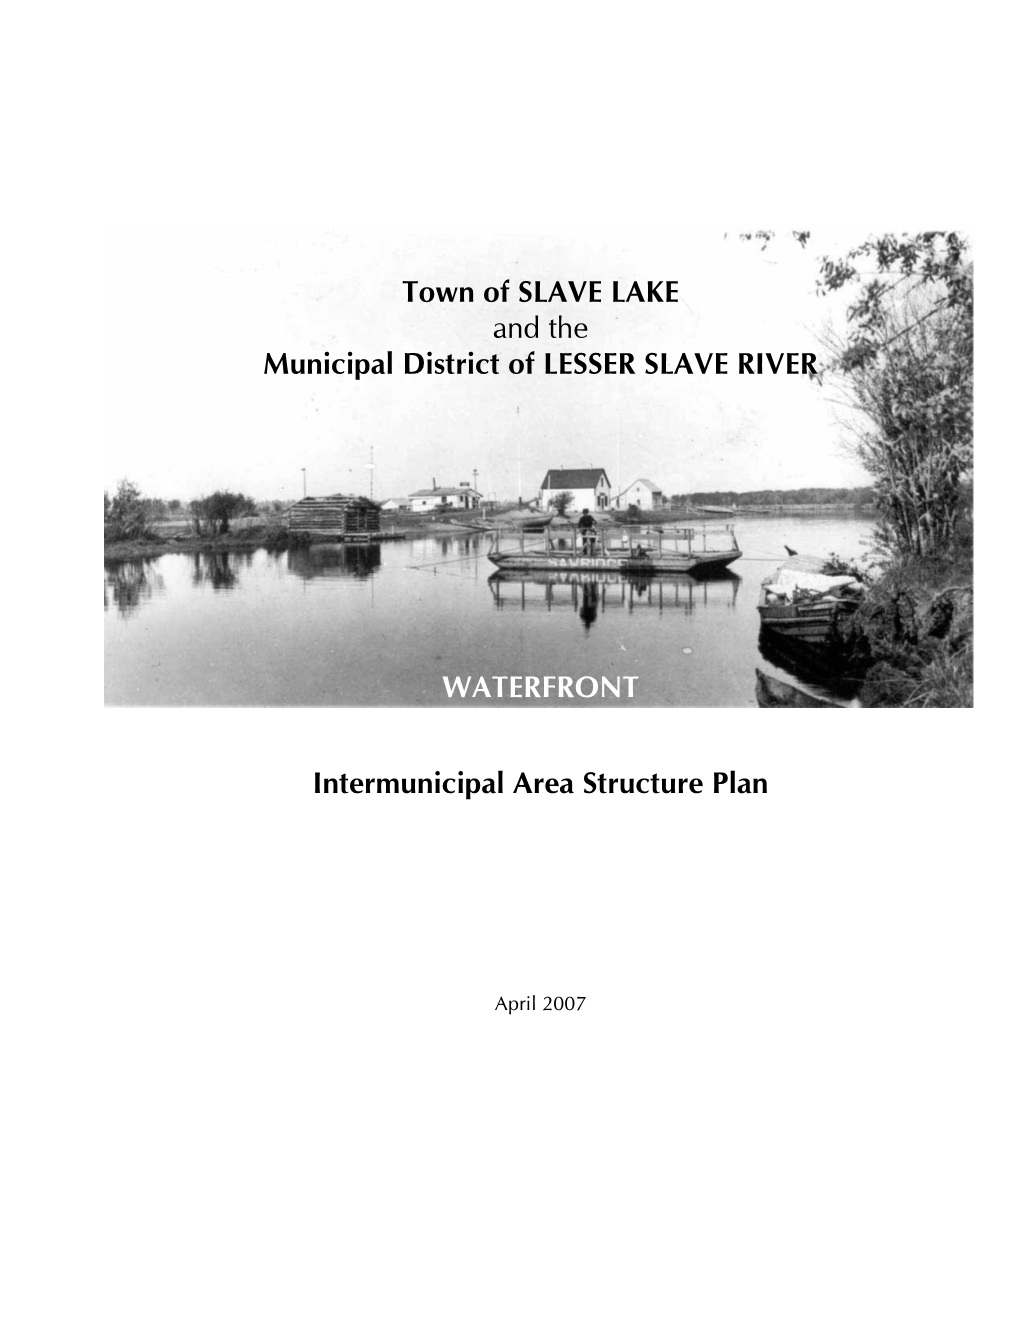 Town of SLAVE LAKE and the Municipal District of LESSER SLAVE RIVER